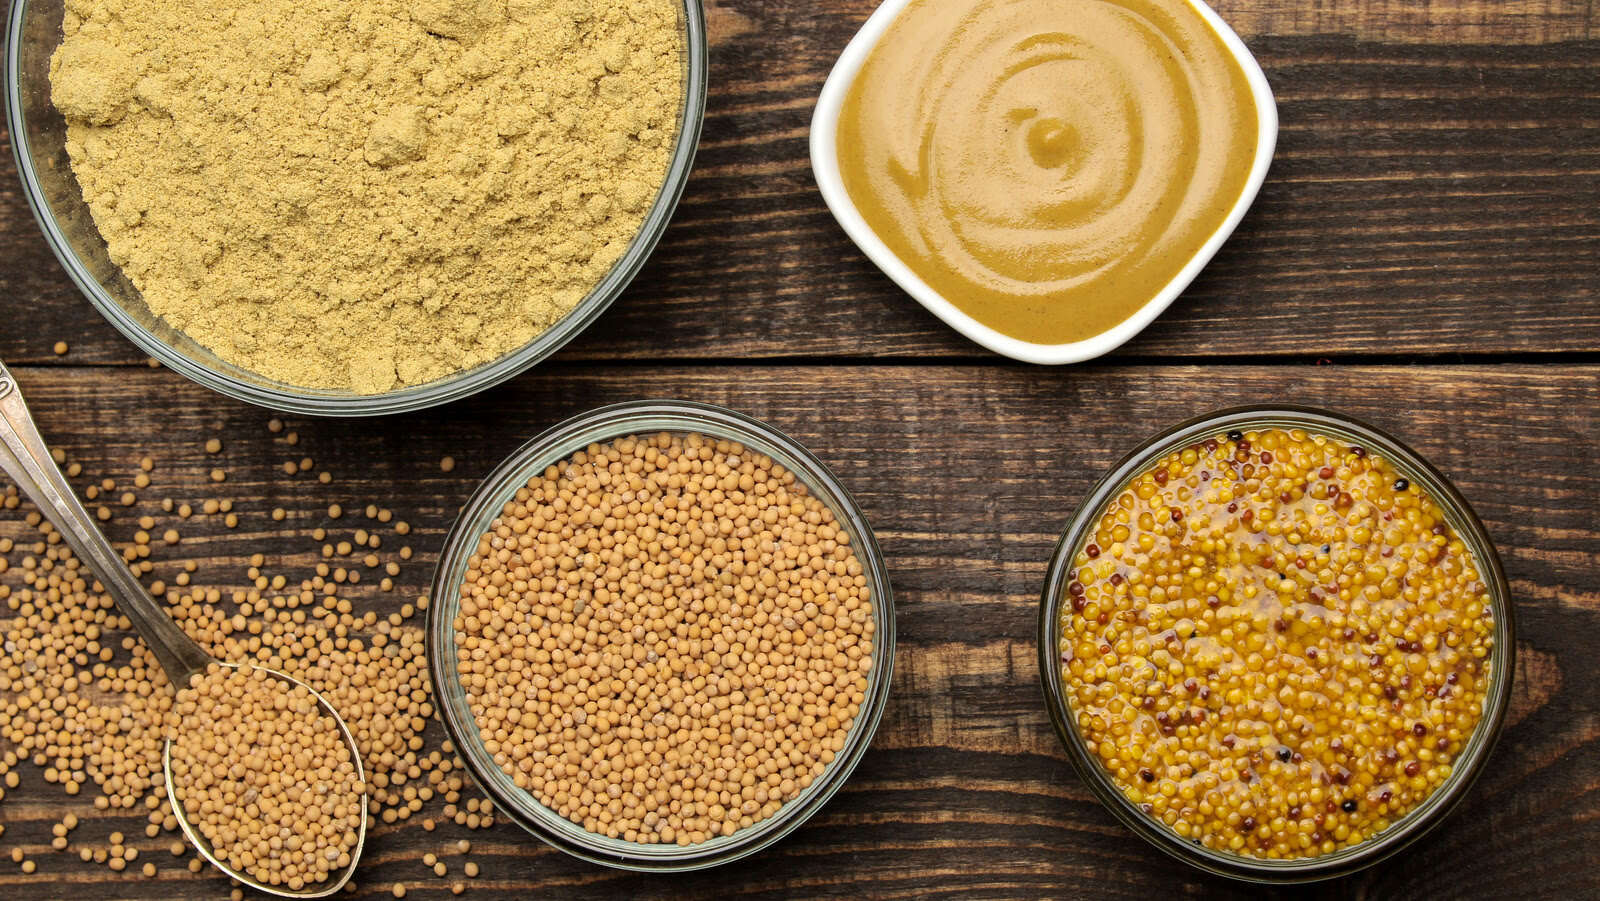 What Can I Use In Place Of Mustard Seed